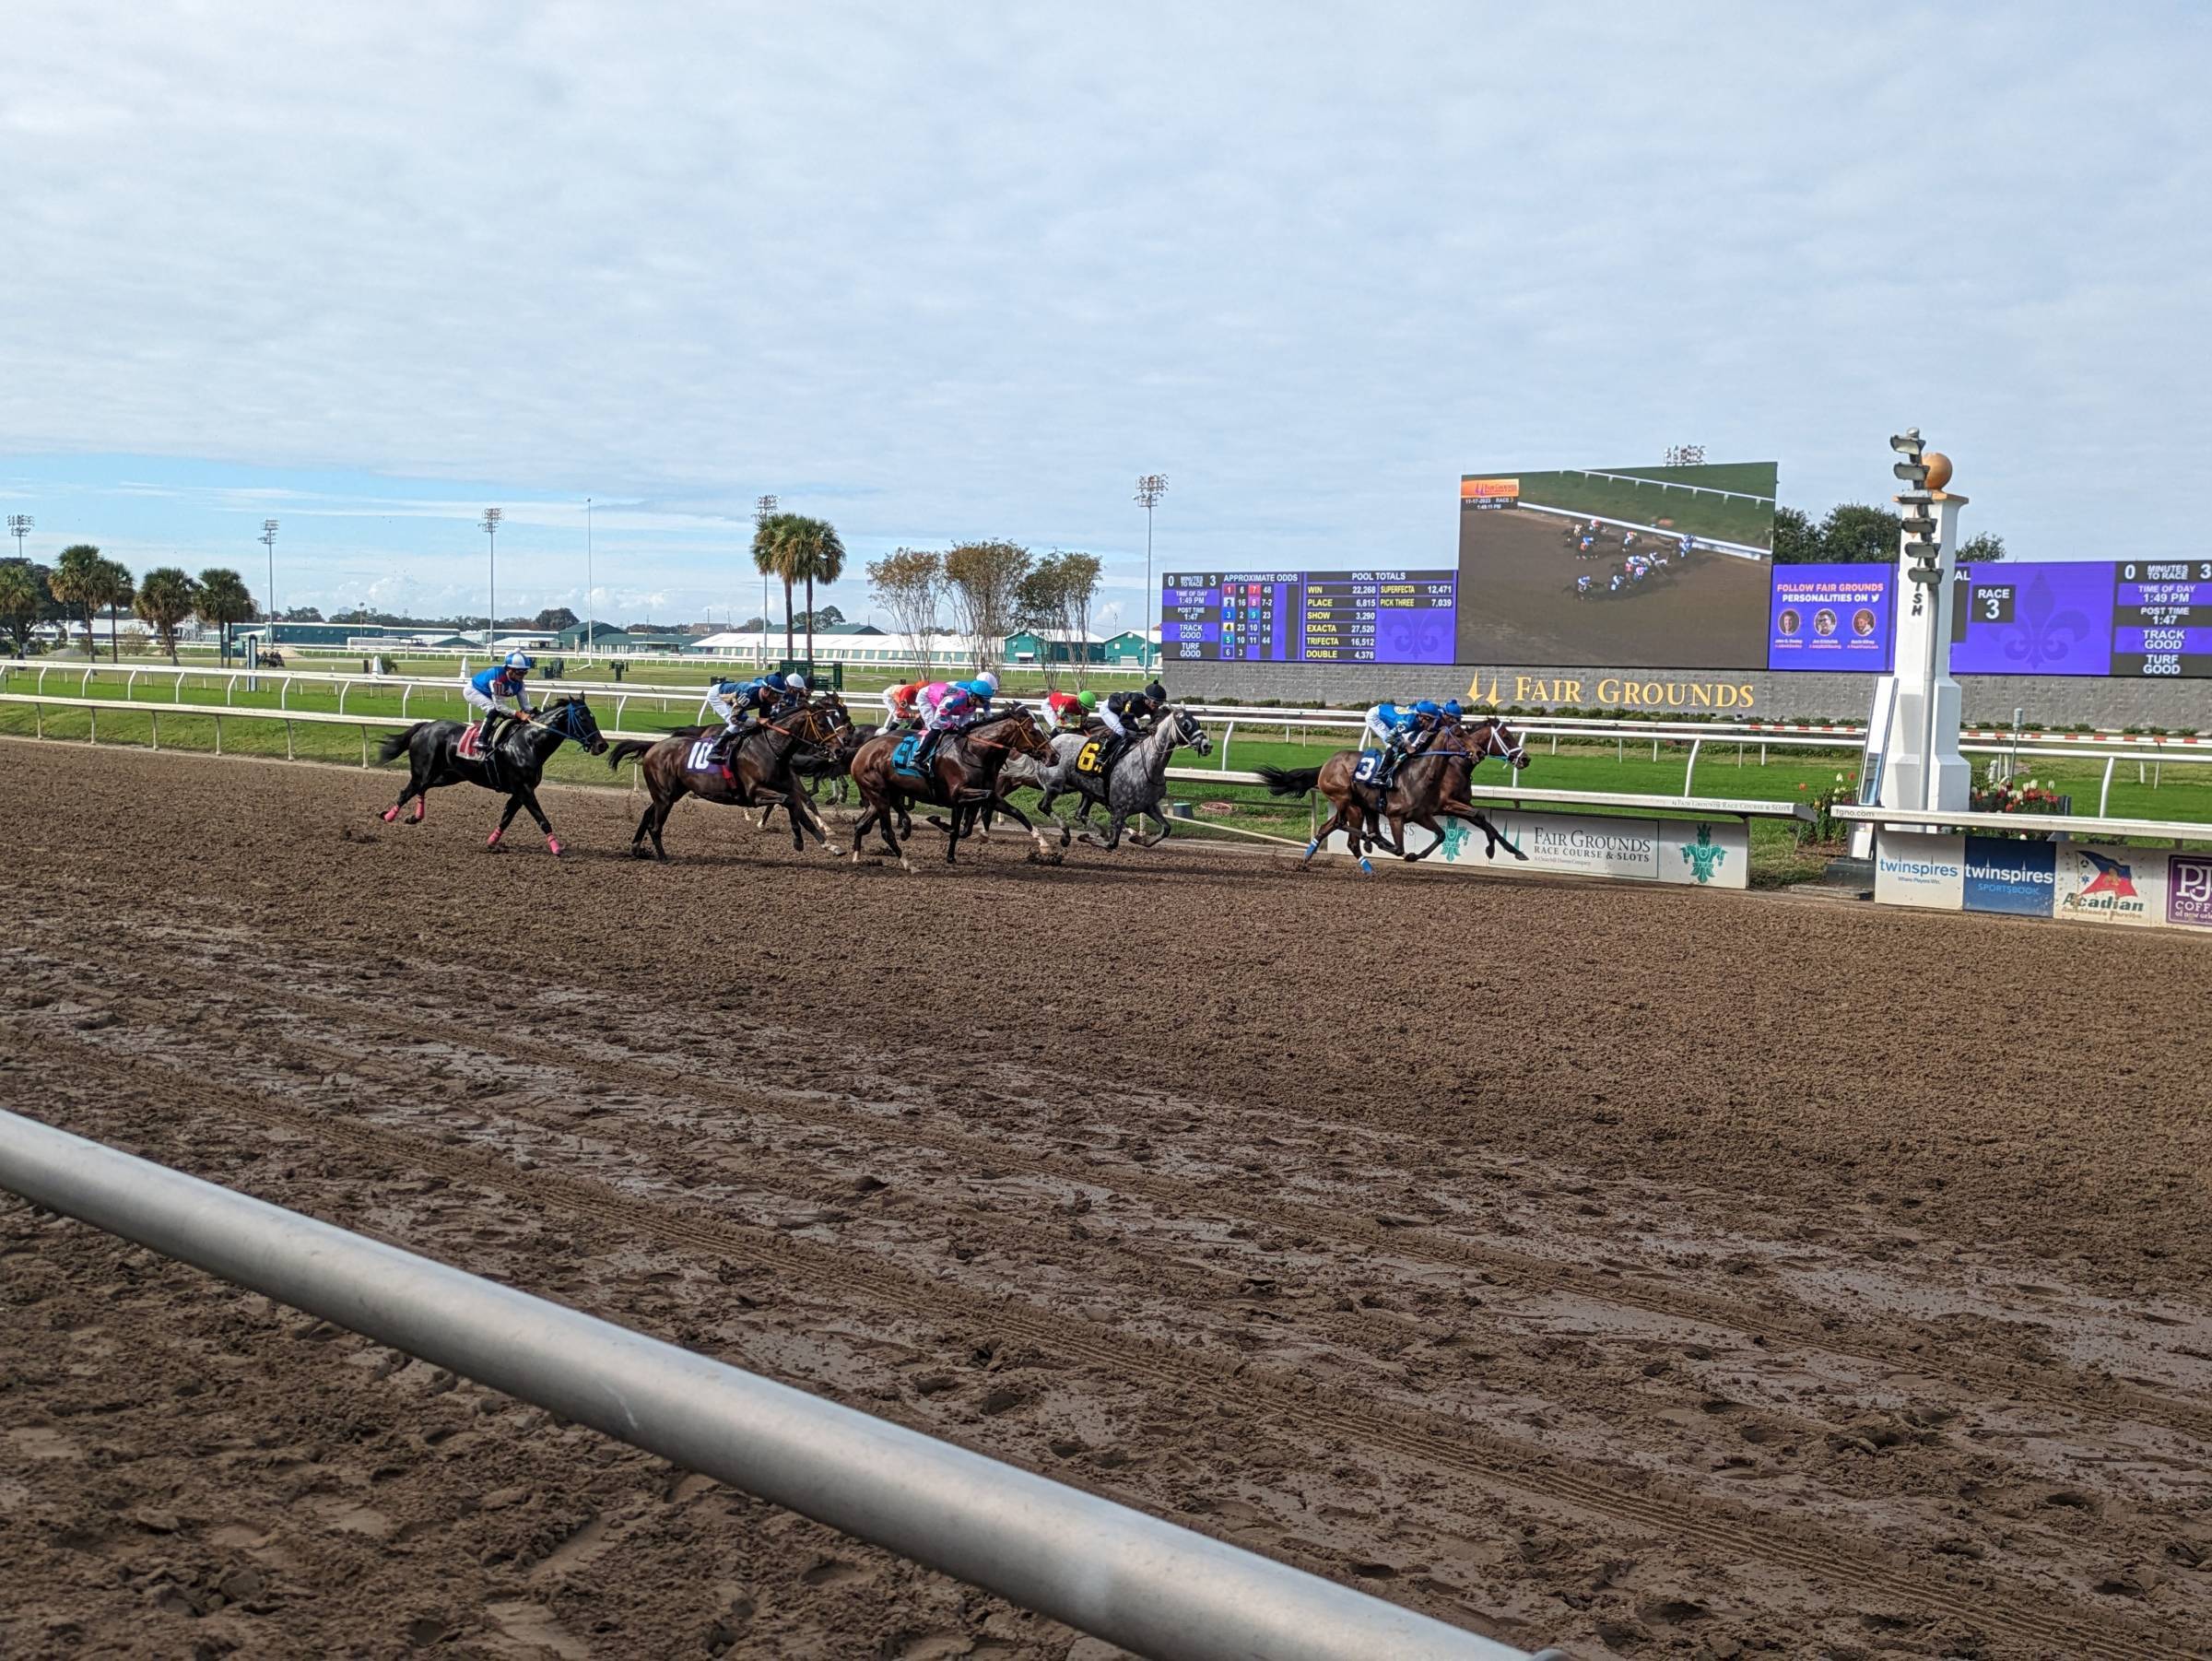 Horse Racing at Fair Ground Race Course in New Orleans, Louisiana